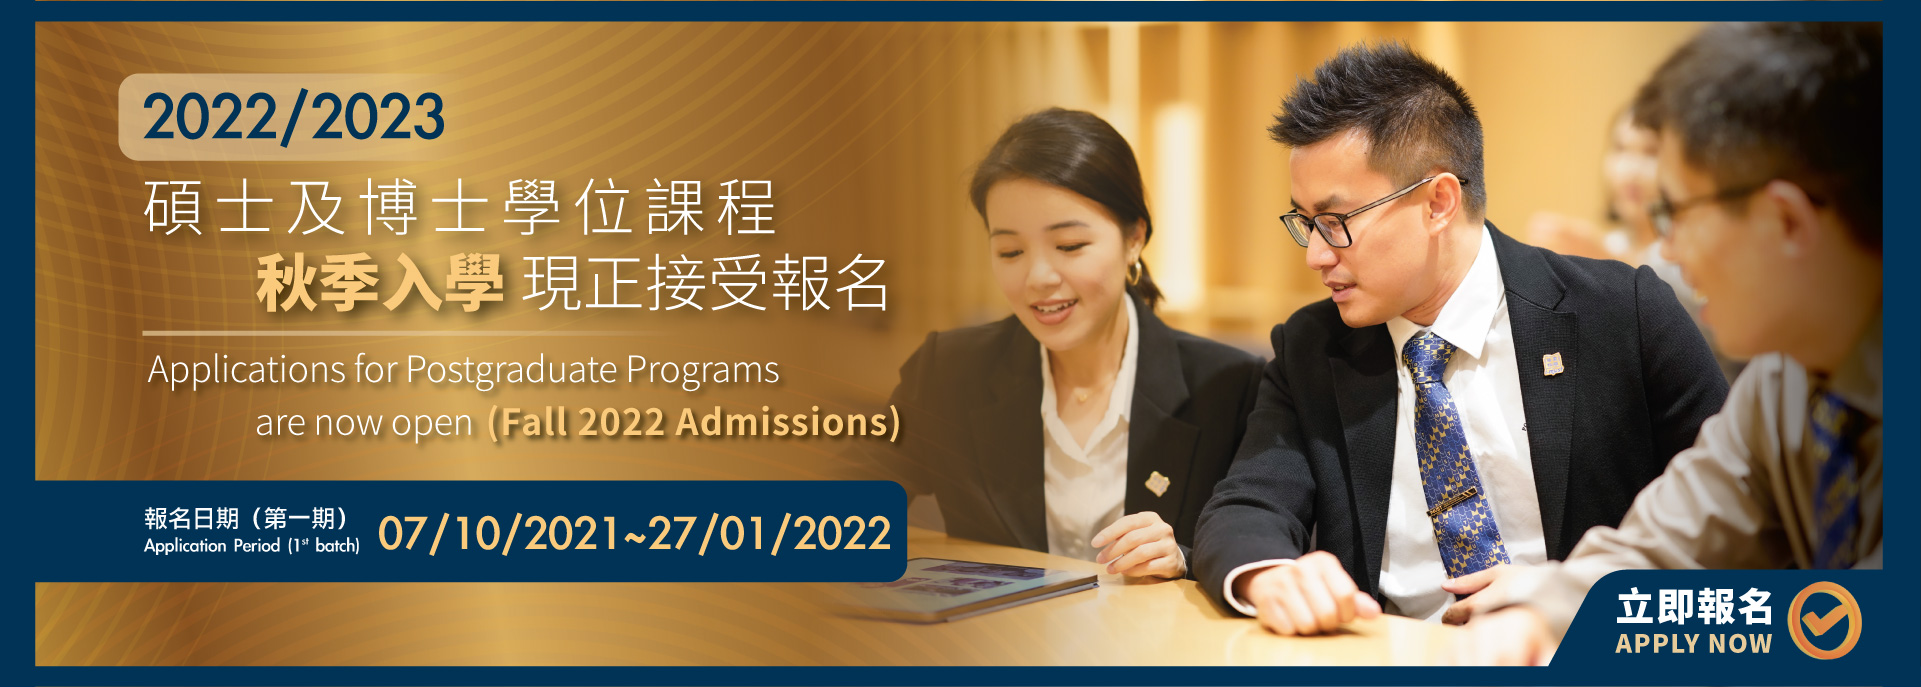 Applications for Postgraduate Programs are now open (Fall 2022 Admissions)